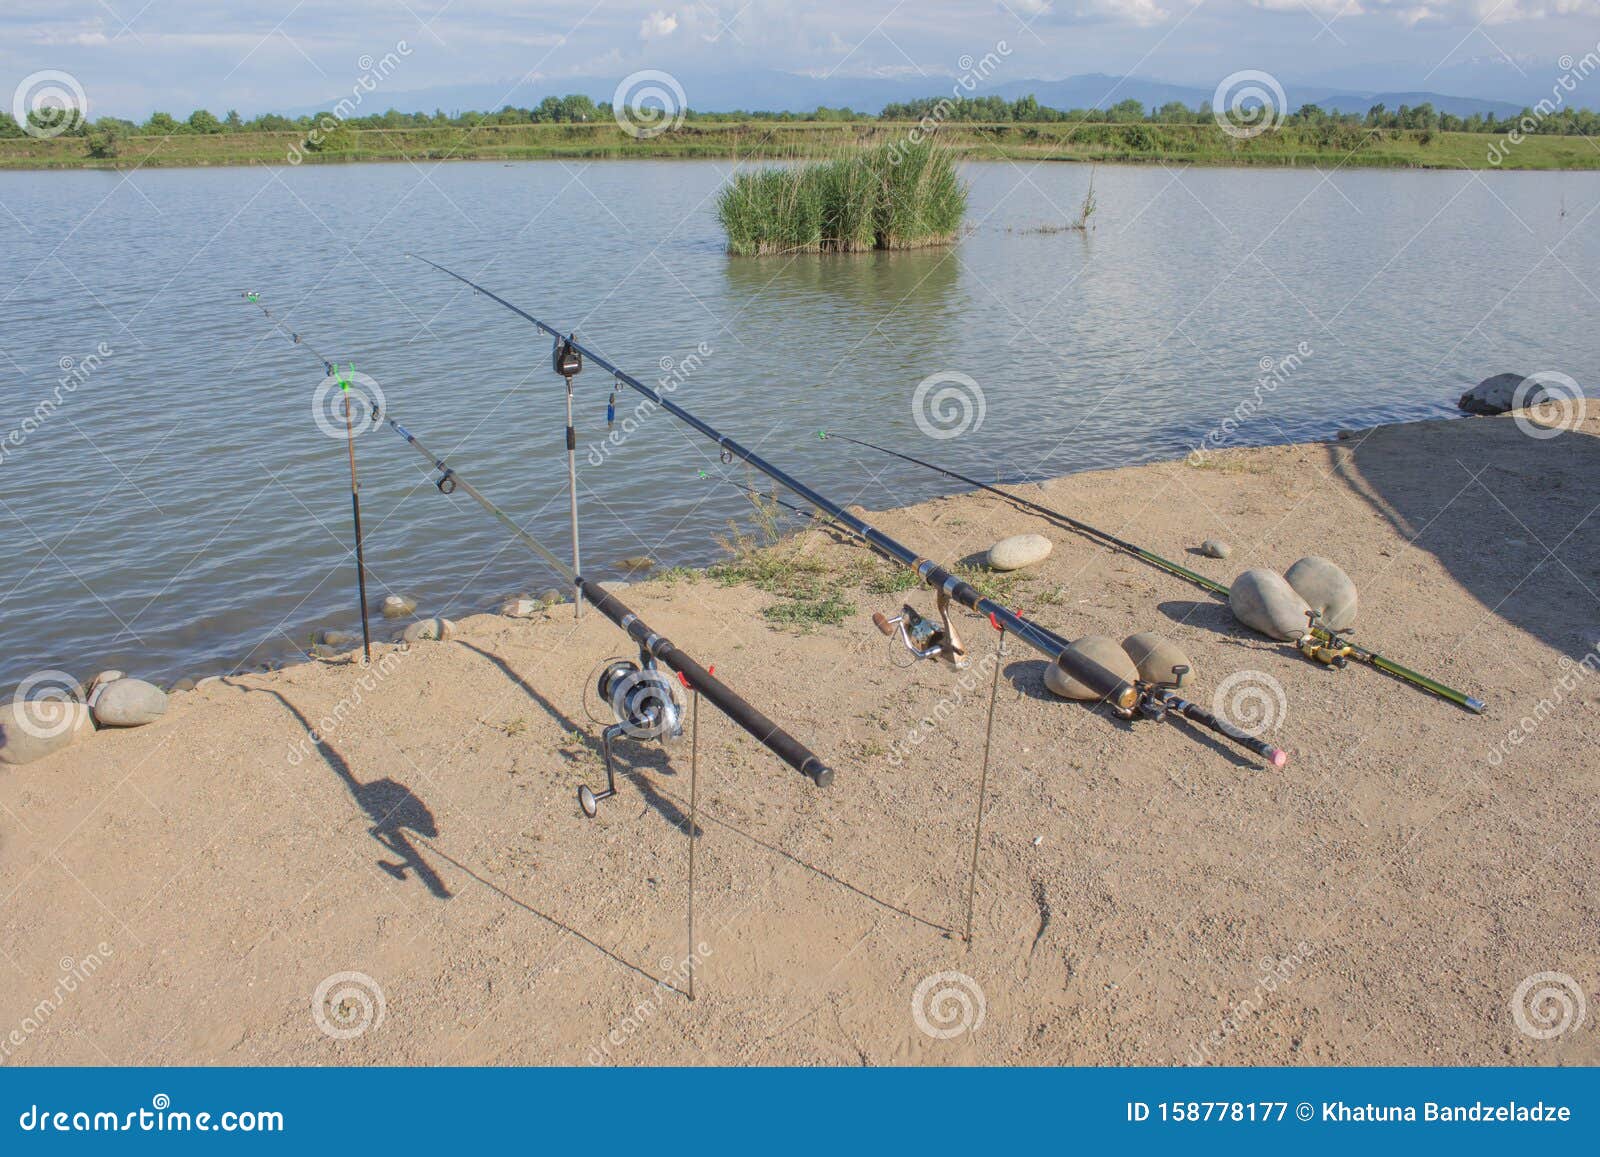 https://thumbs.dreamstime.com/z/freshwater-angling-rods-lake-reel-fishing-rod-prop-water-background-158778177.jpg